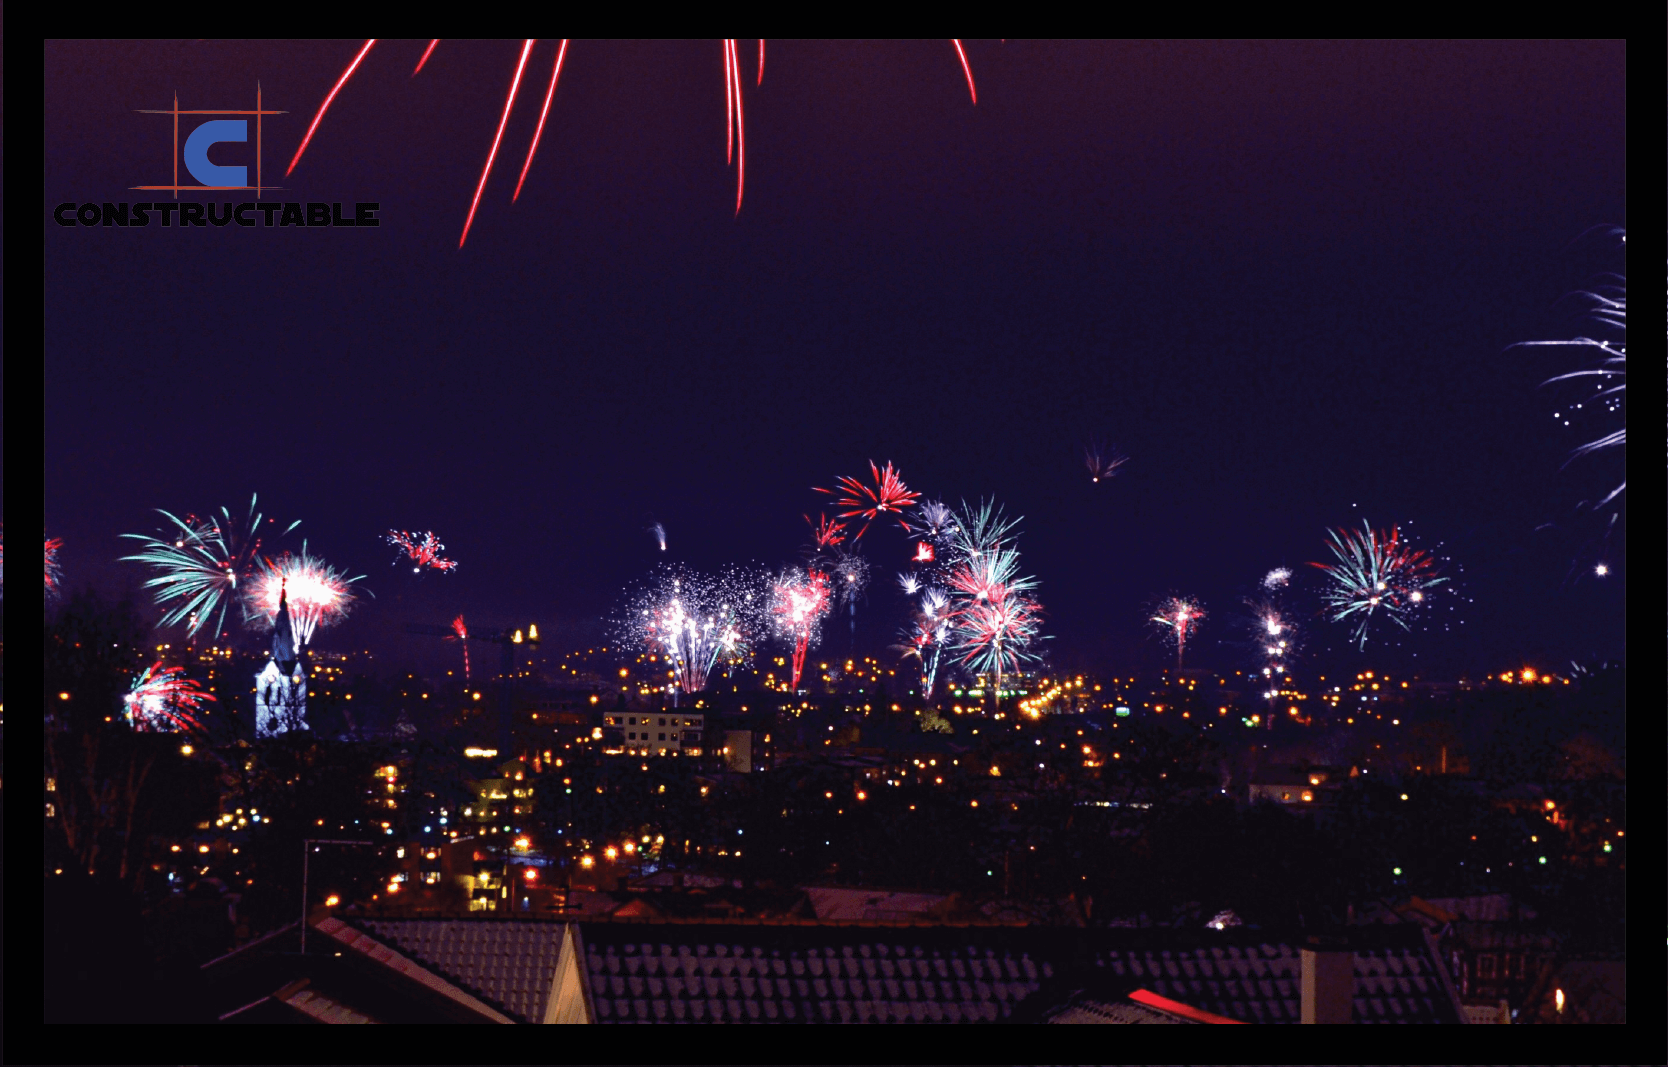 A vibrant display of multicolored fireworks bursts above a cityscape at night, with buildings silhouetted against the illuminated sky and a 2021 logo in the upper left corner.